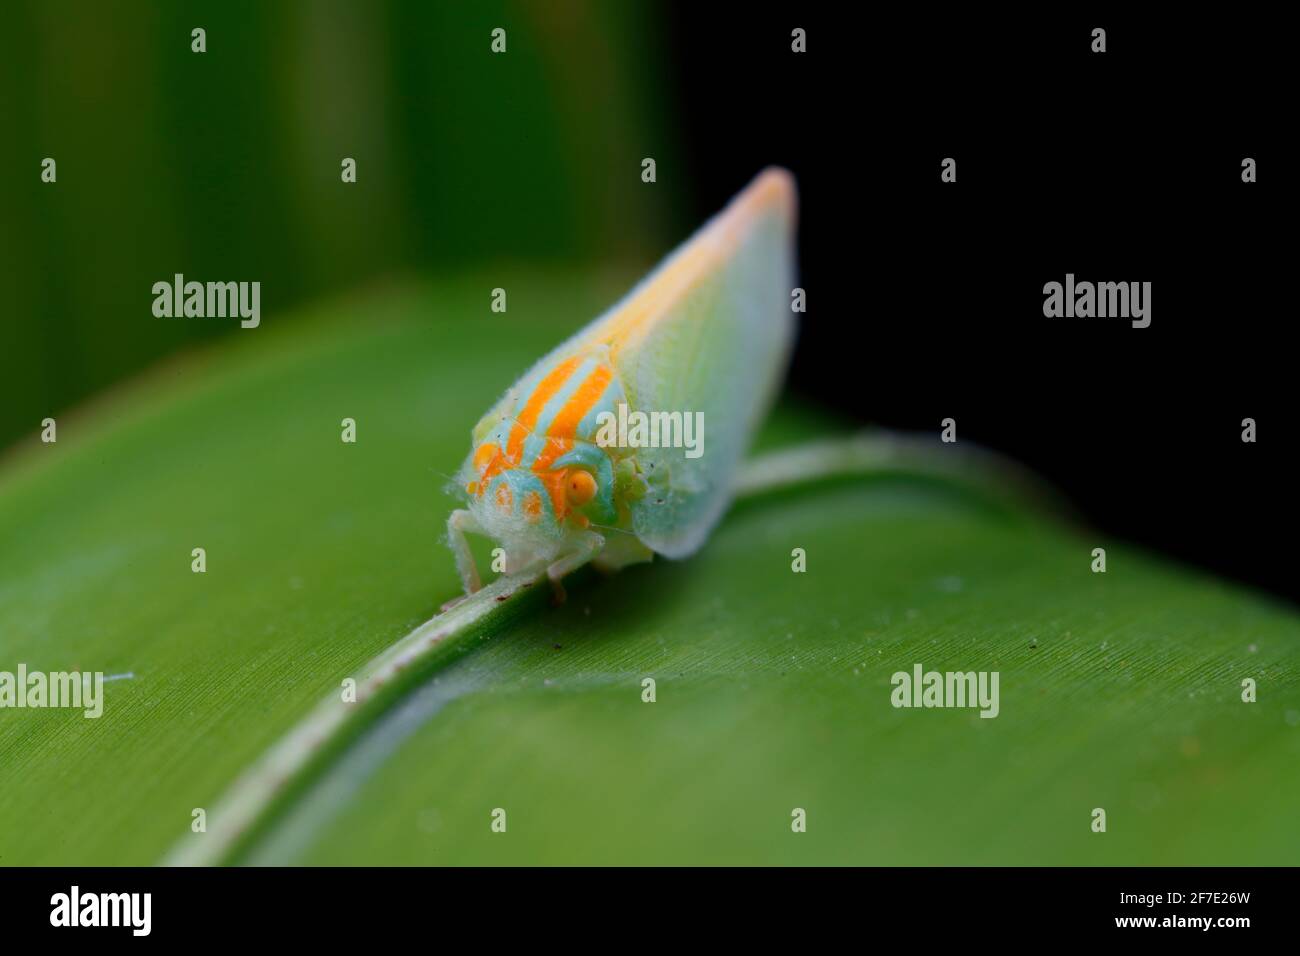 A palmetto leaf hopper is perched on a frond. Stock Photo